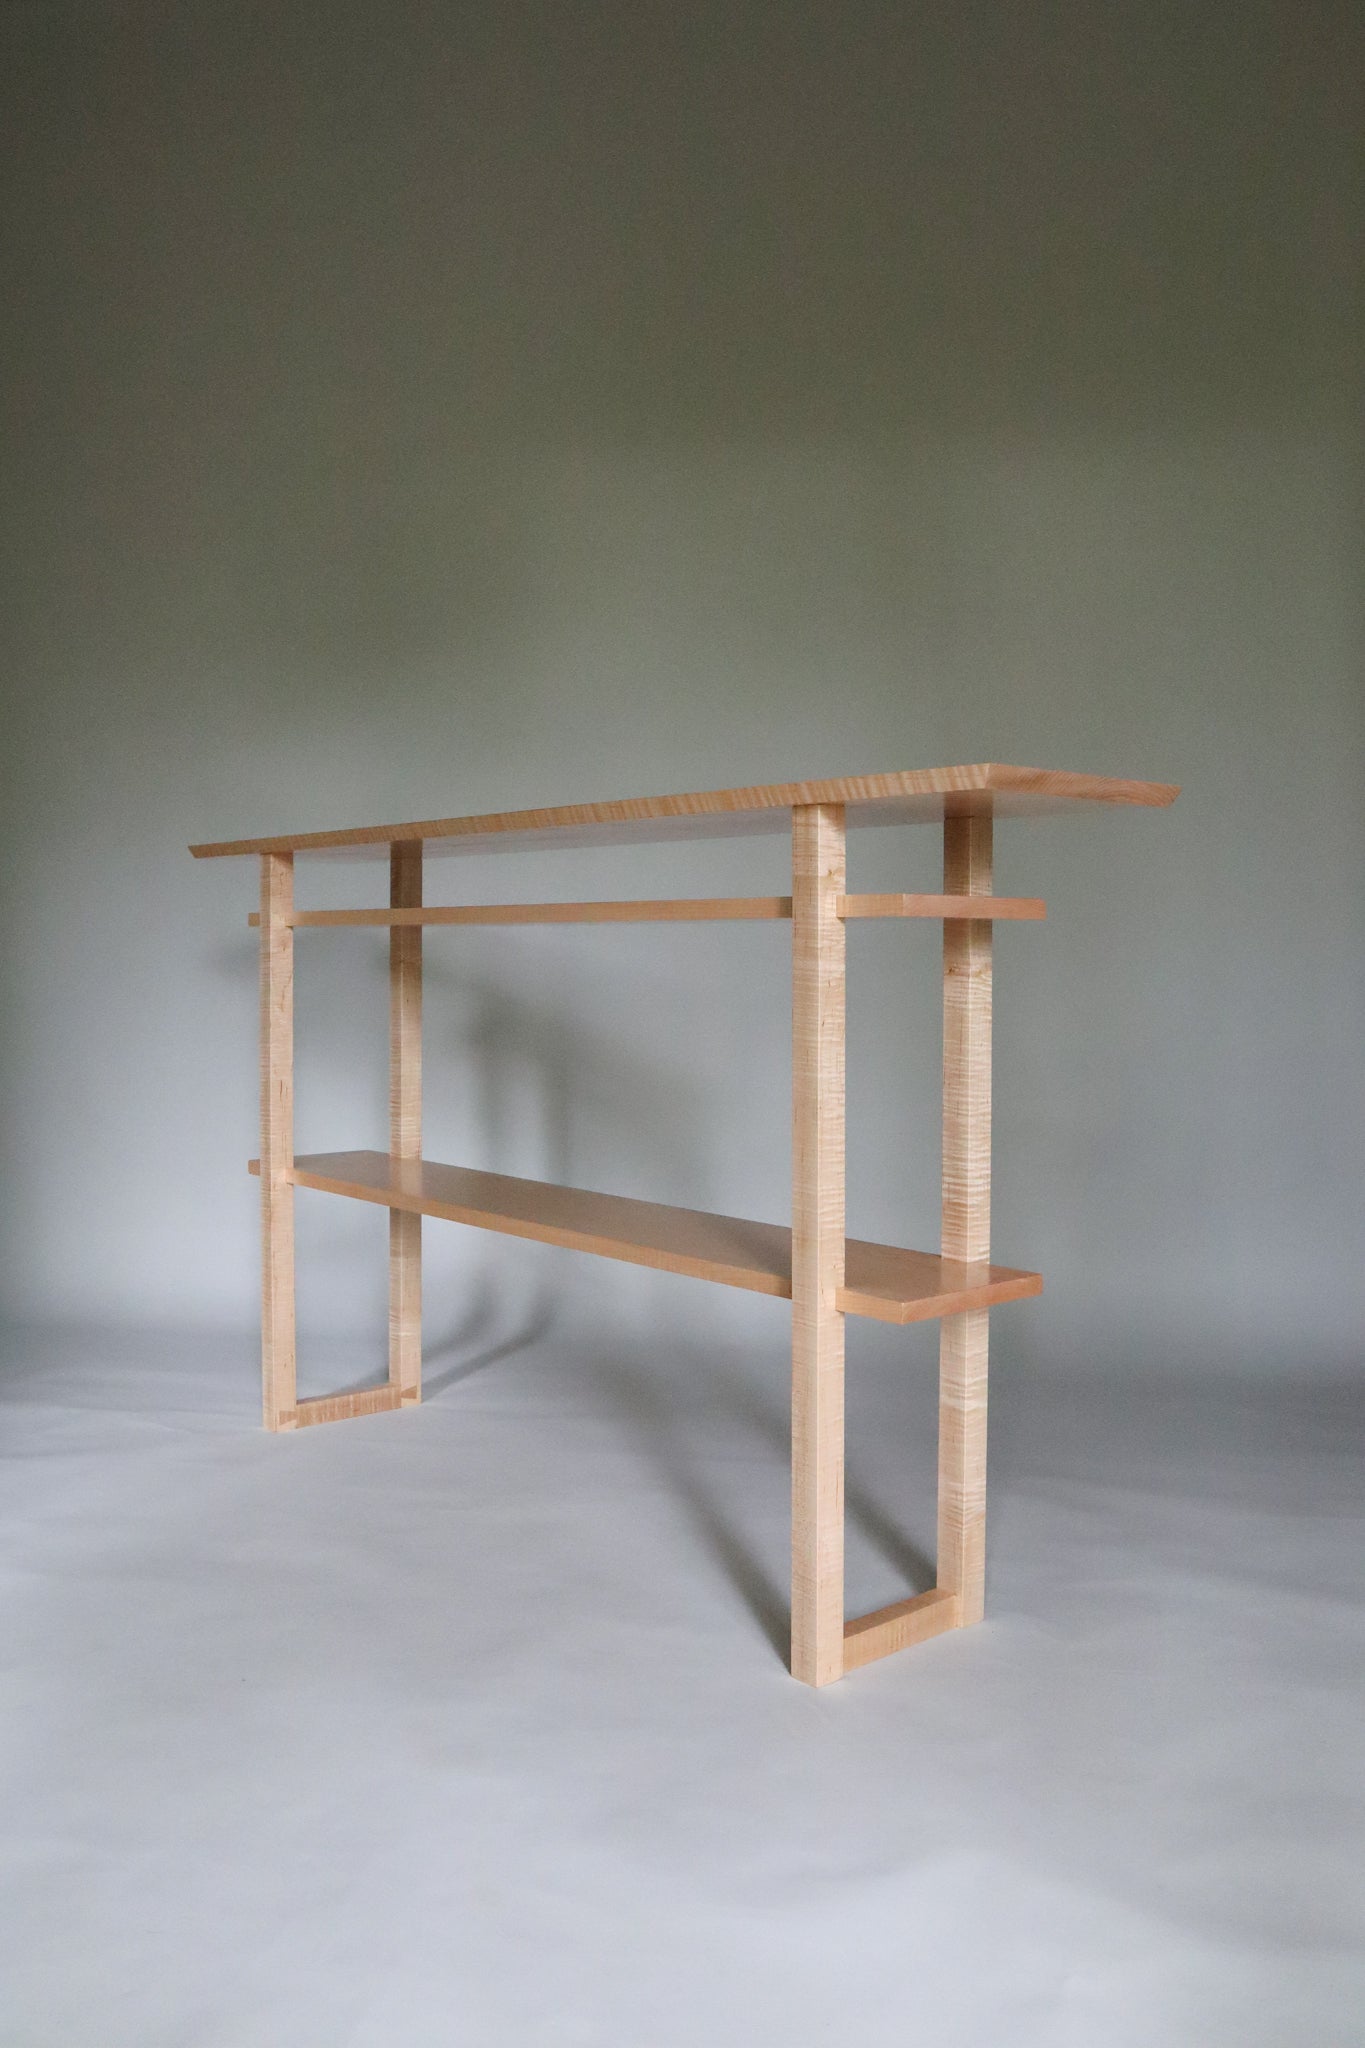 A unique tiger maple hallway console table with shelves by Mokuzai Furniture.  Our narrow modern console tables add beauty to narrow spaces like hallways and entryway decor.